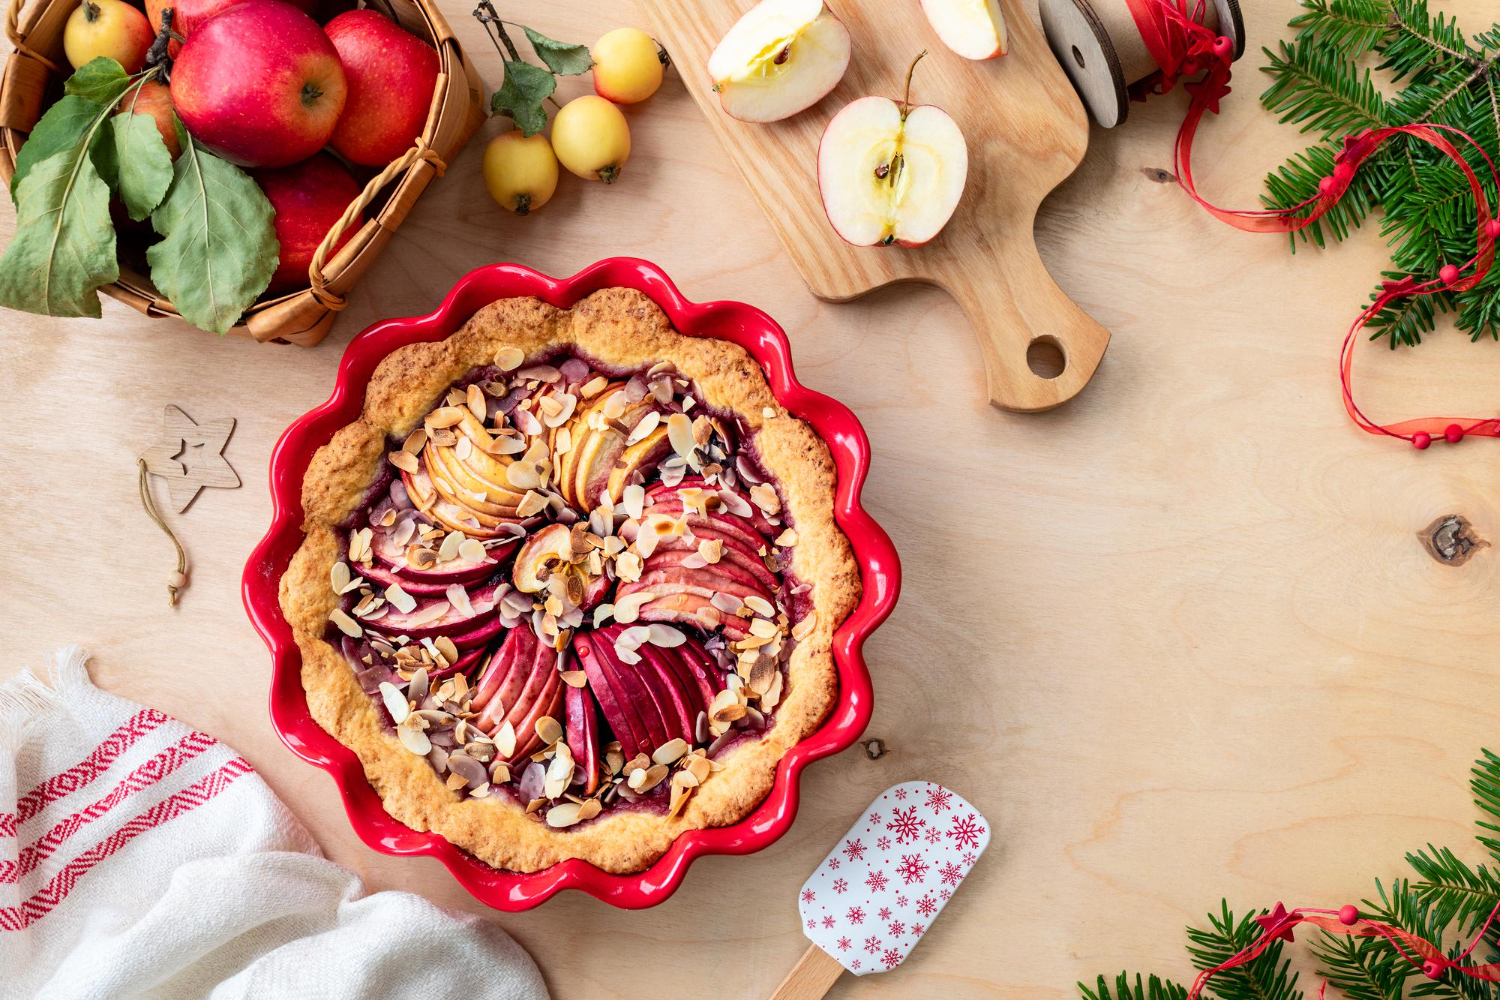 homemade cake with cranberry jam fresh red apples wooden background apple pie new year christmas